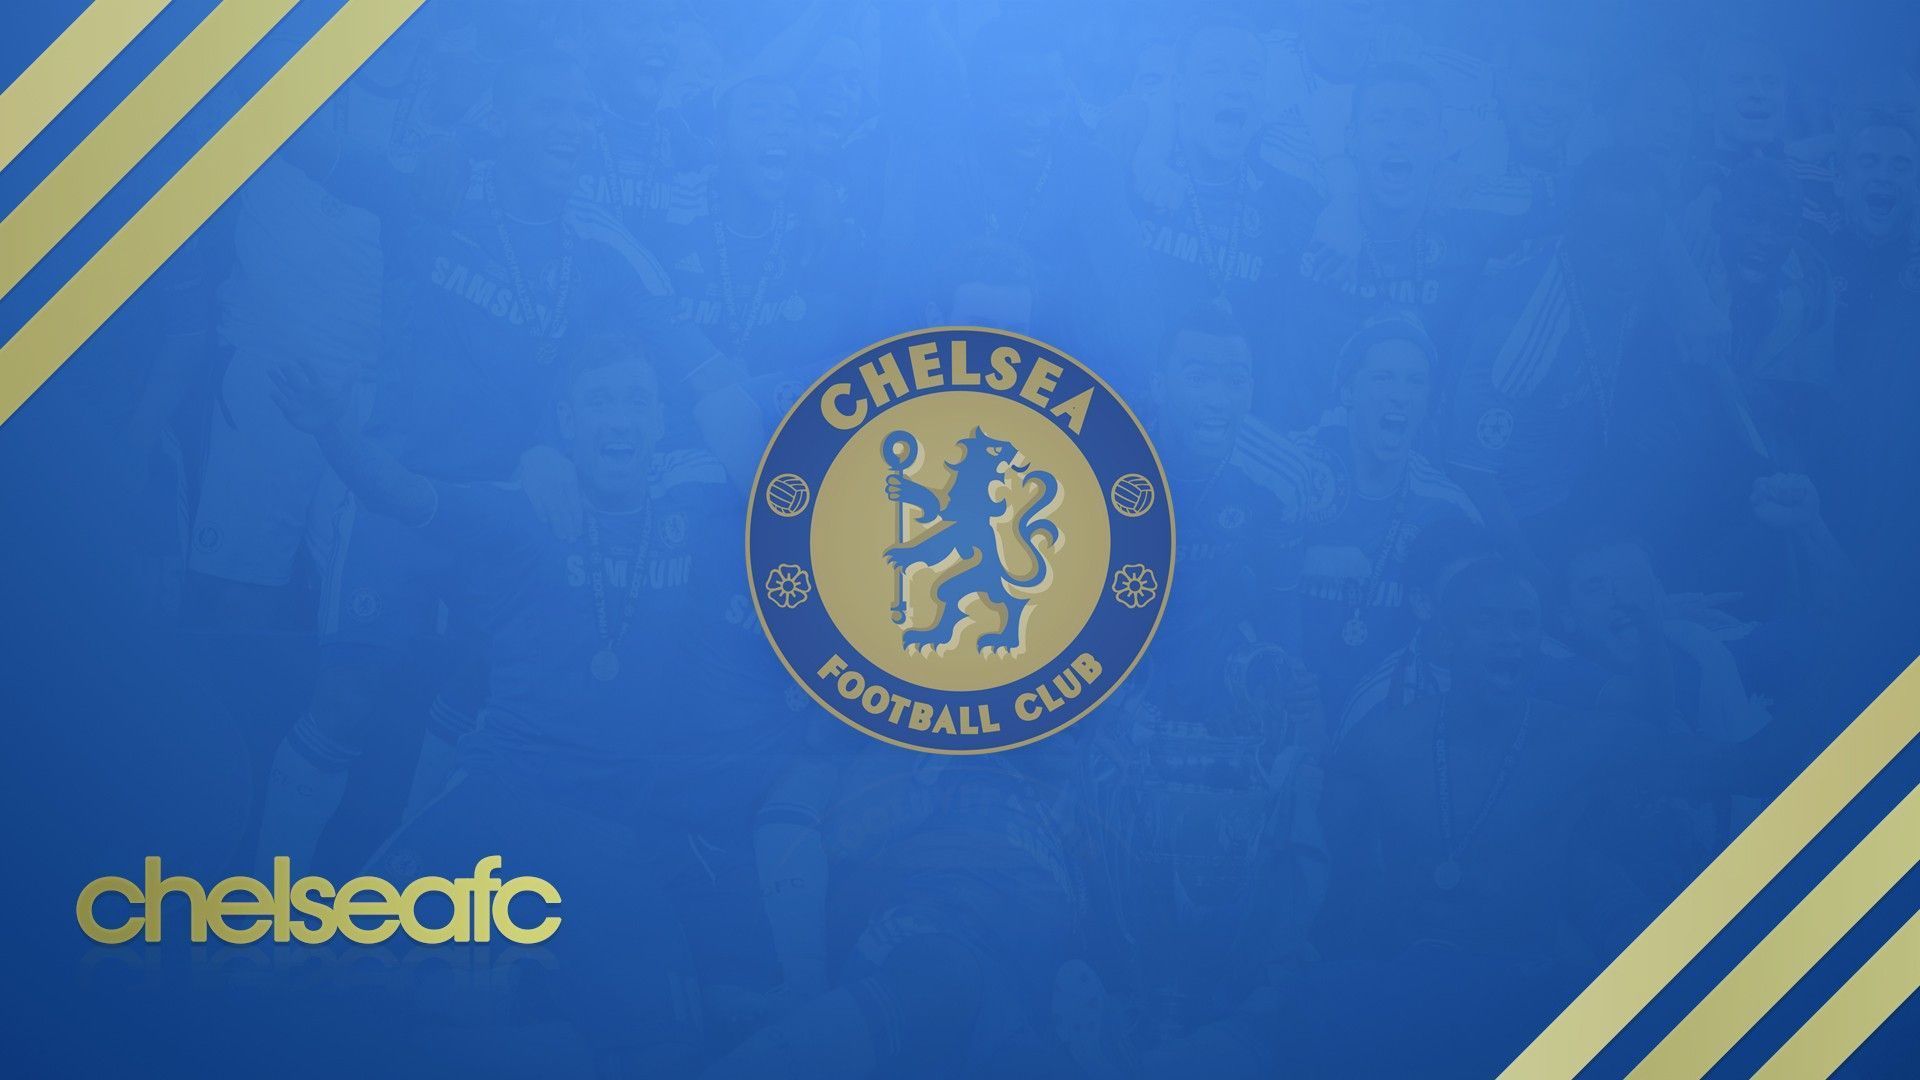 Chelsea Fc wallpapers